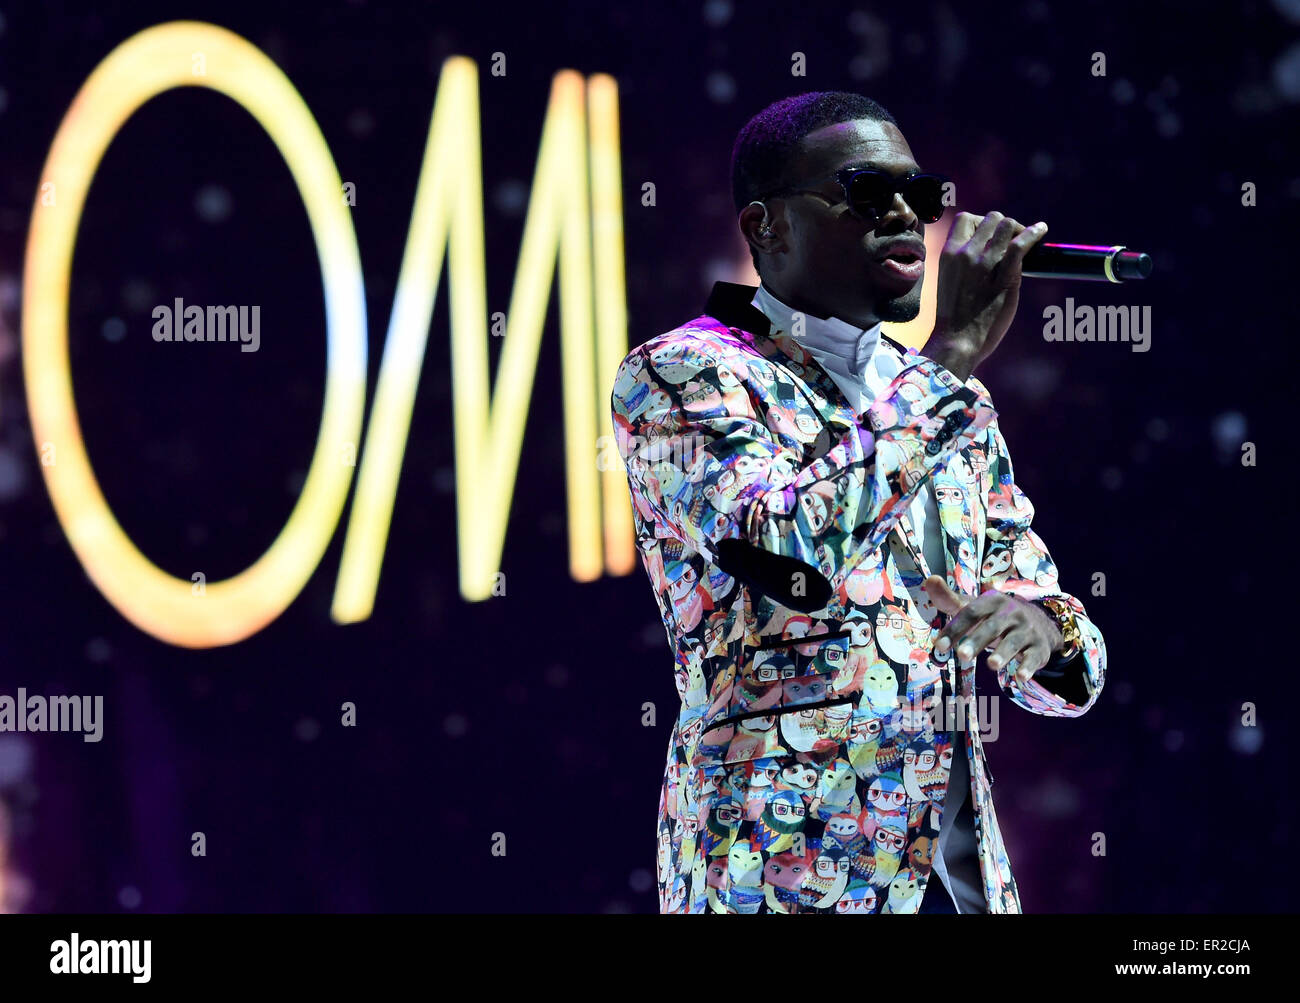 Munich, Germany. 23rd May, 2015.  Singer Omi performes during the FC Bayern Muenchen Champions dinner at Postpalast on May 23, 2015 in Munich, Germany. Credit:  kolvenbach/Alamy Live News Stock Photo